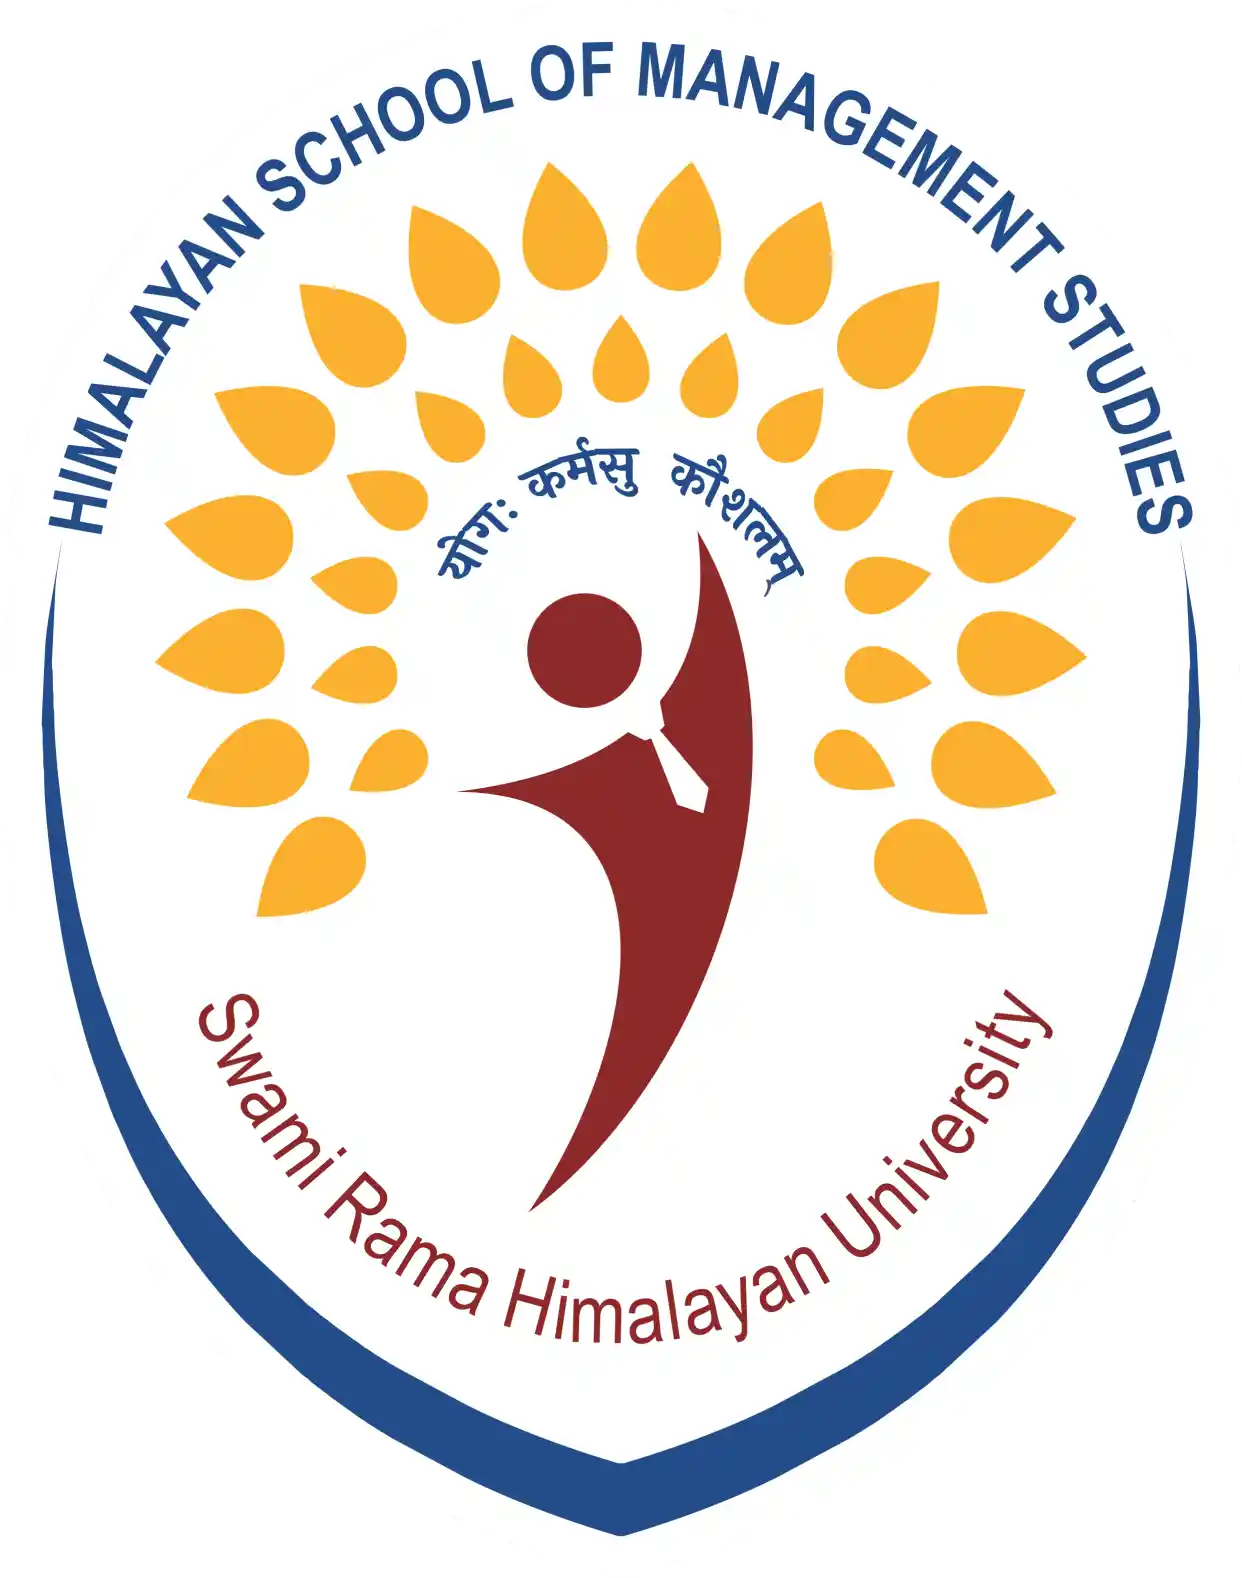 Himalayan School of Science and Technology, logo